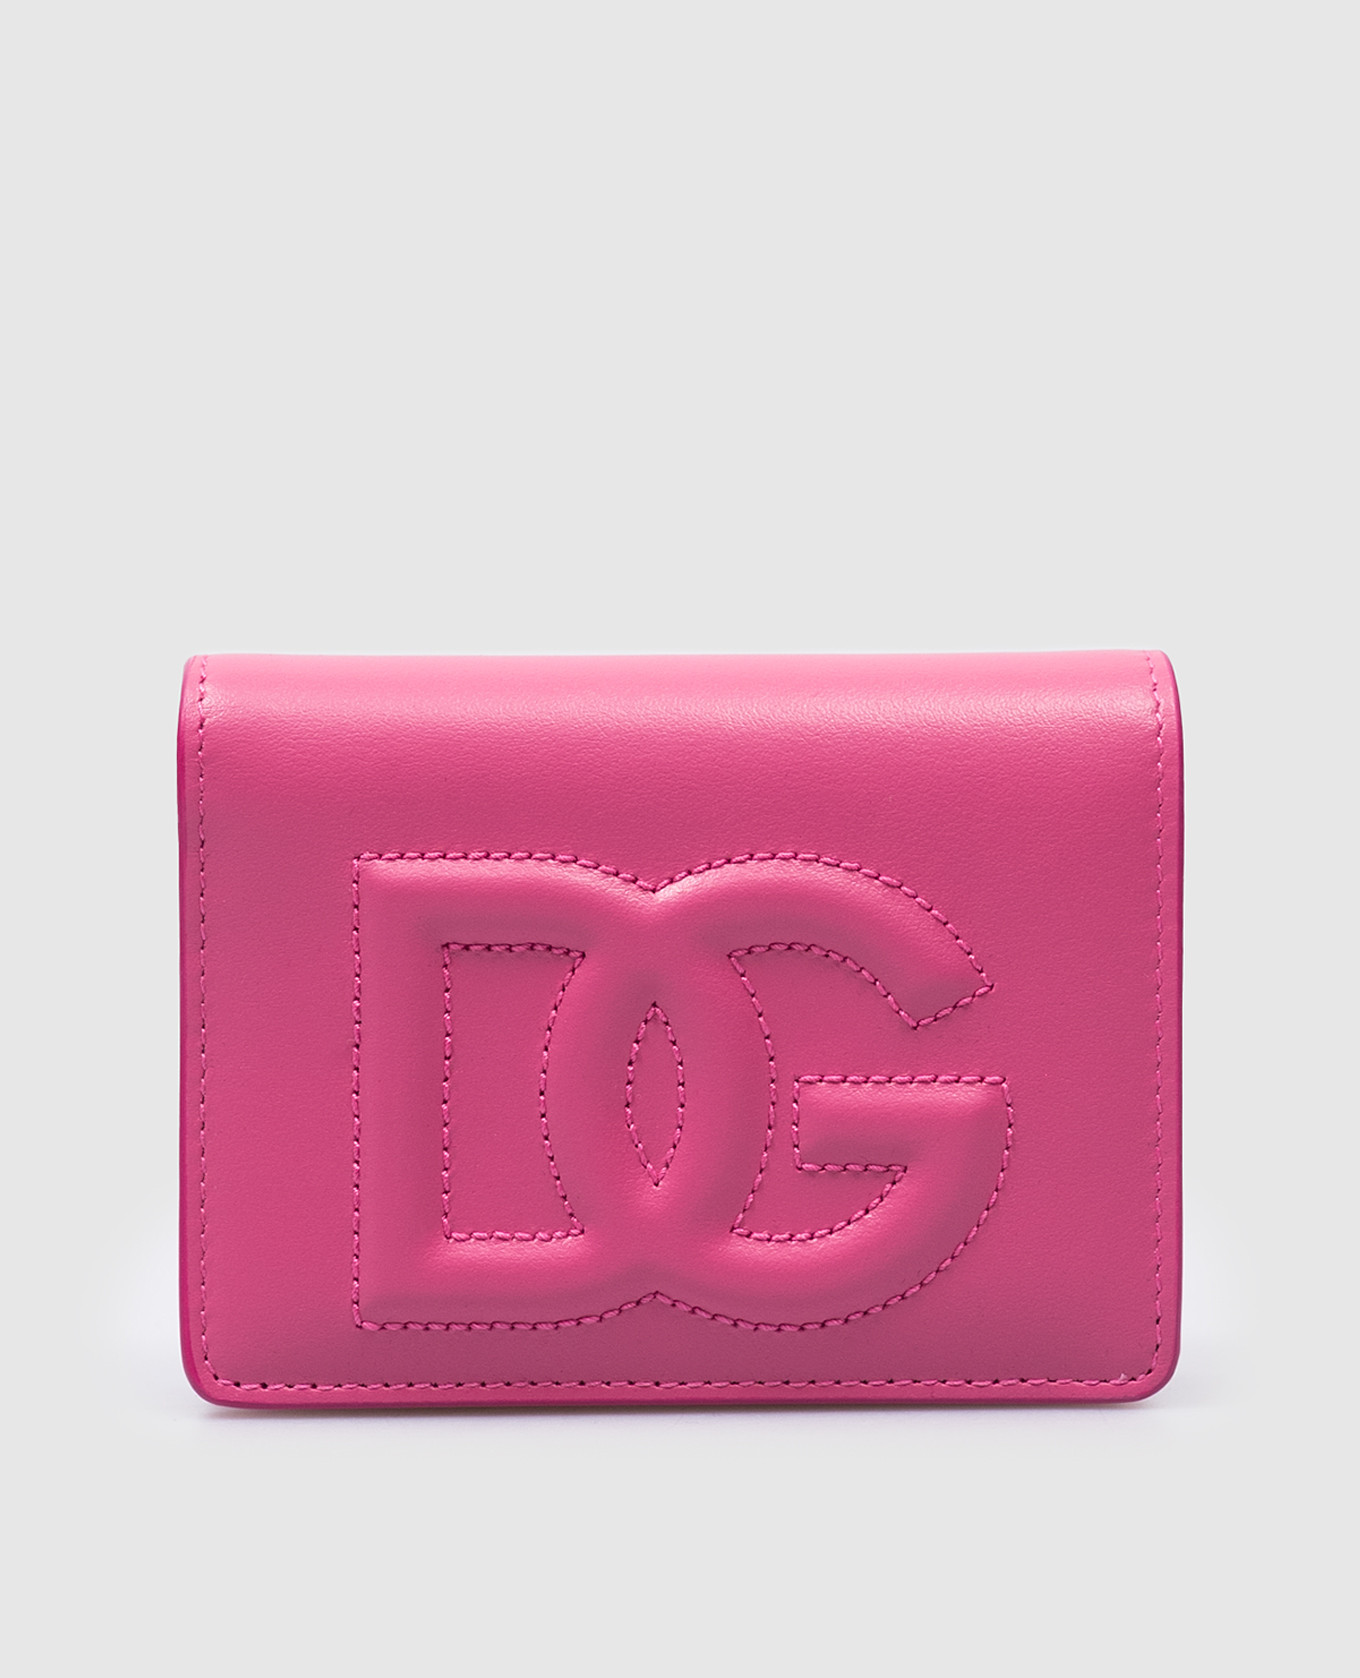 Pink leather purse with textured logo